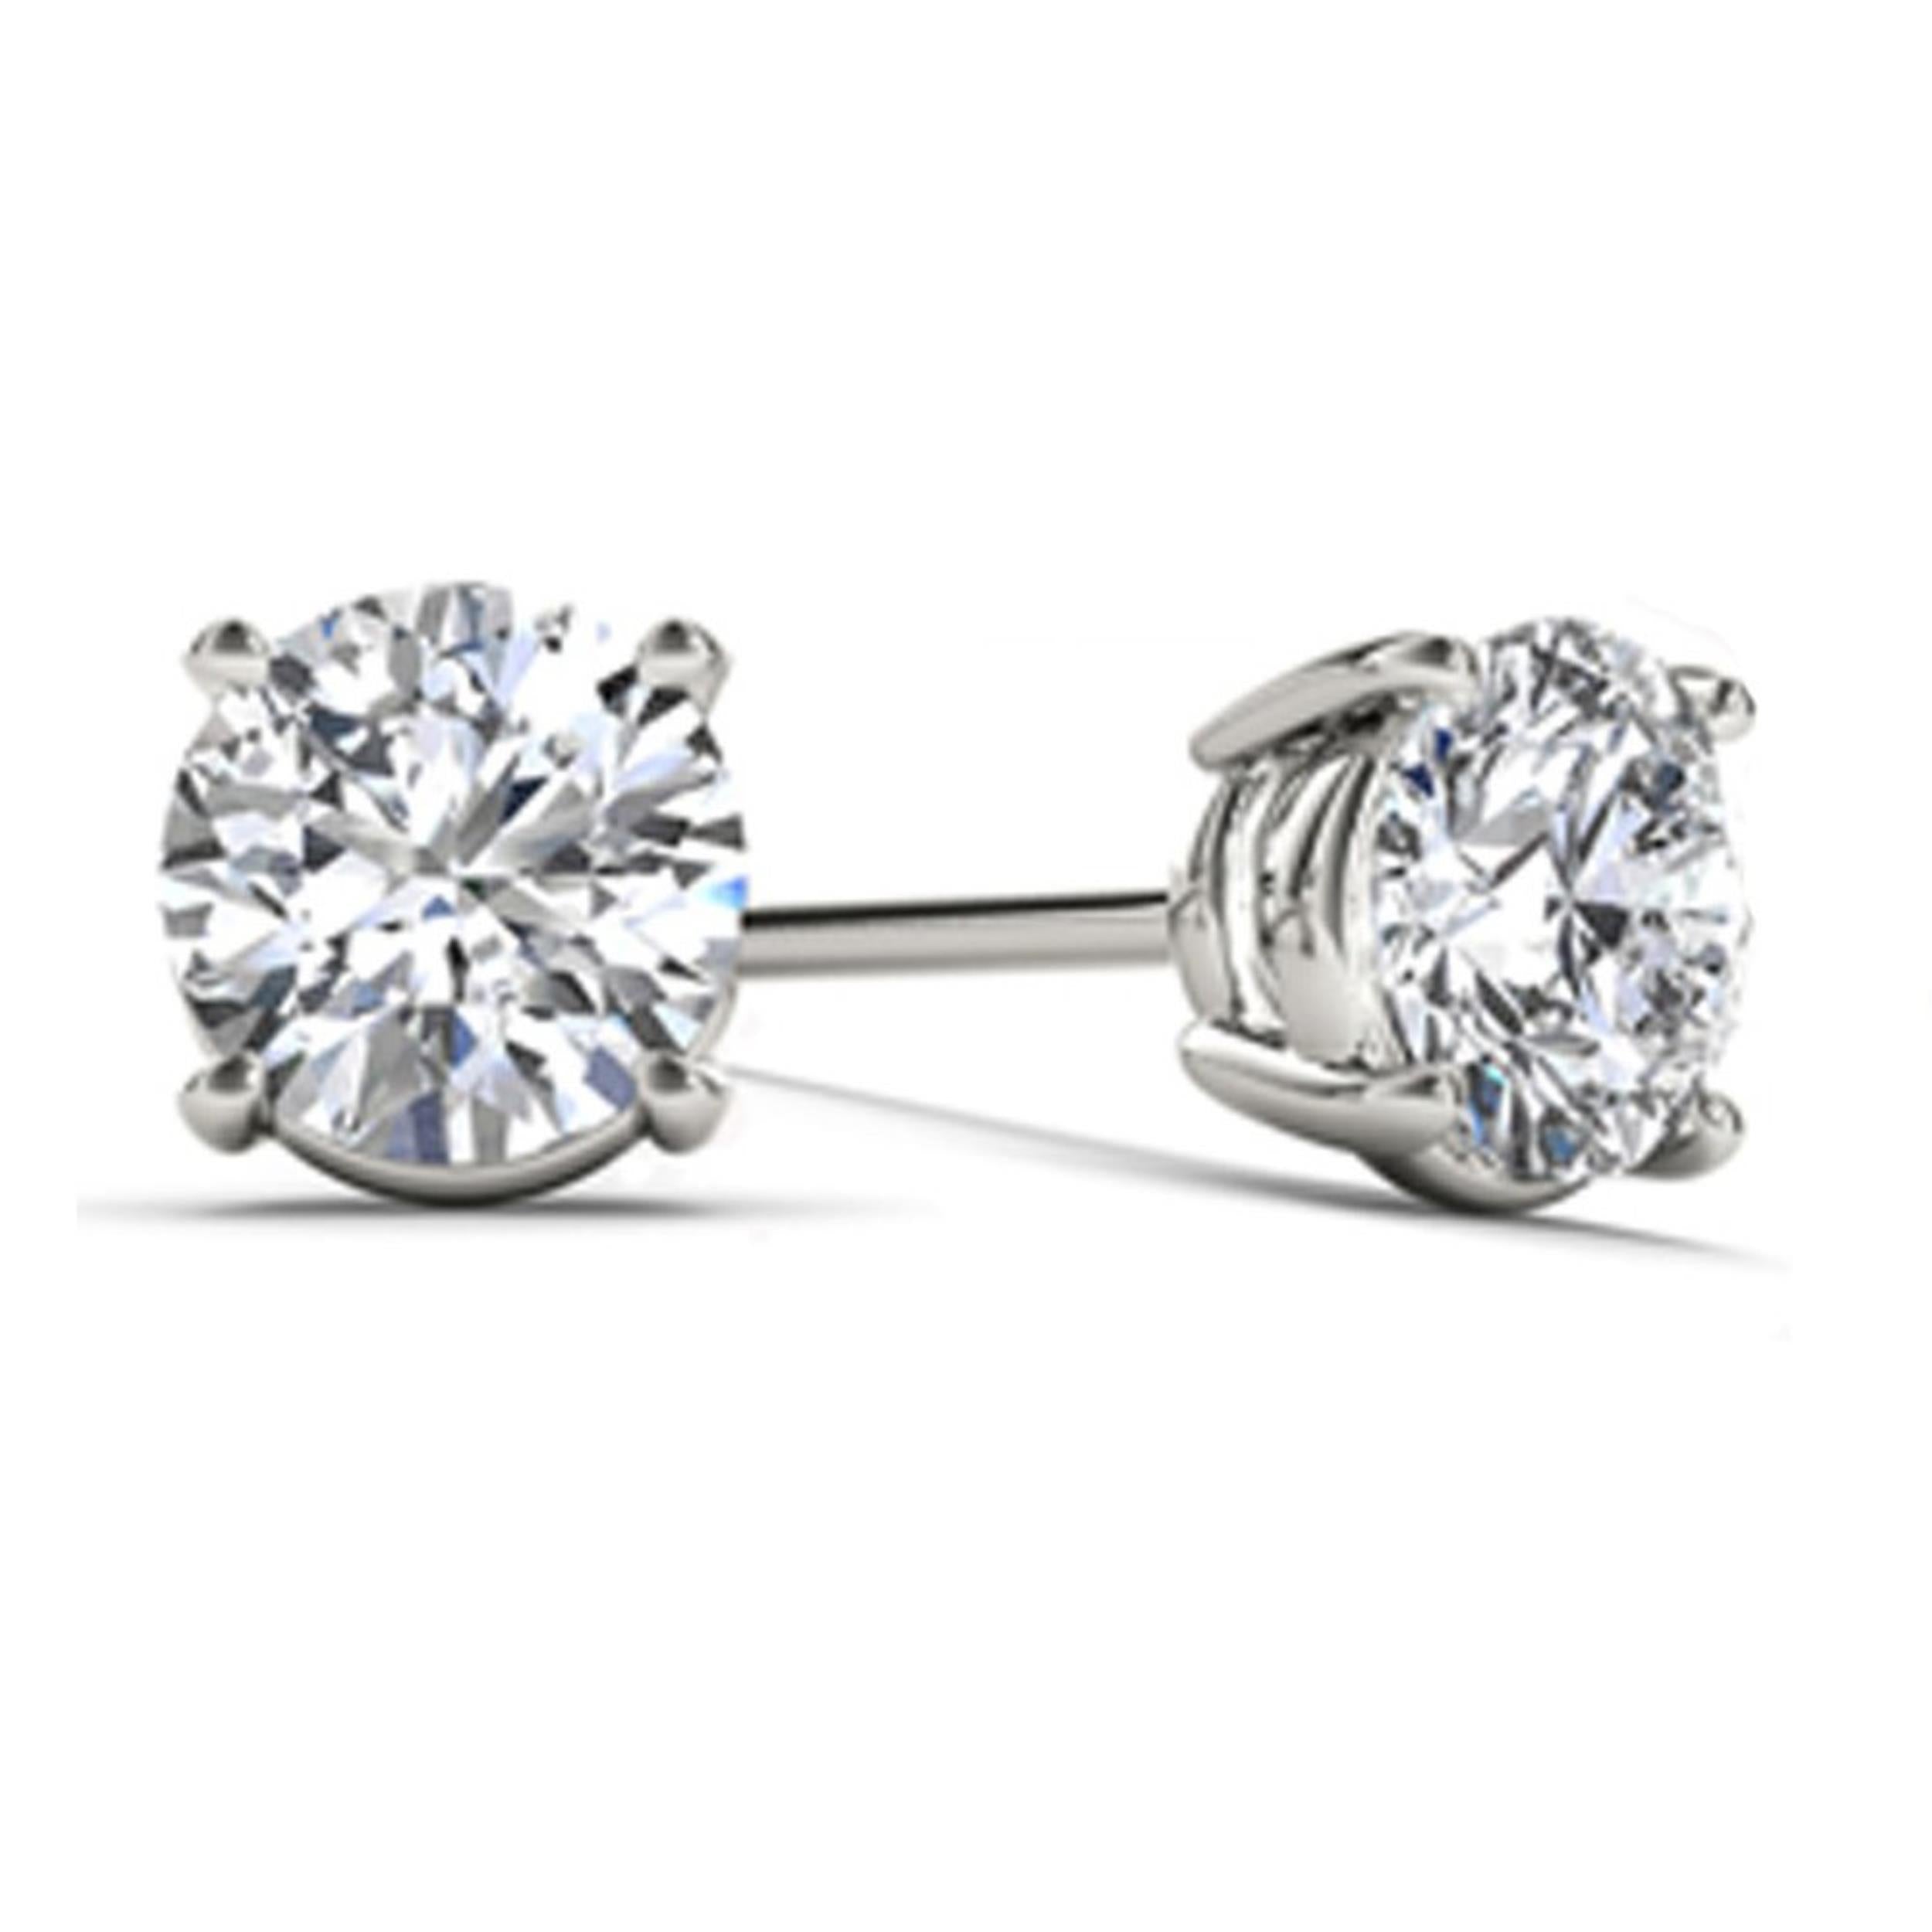 14Kt White Gold 0.40 Ct Genuine Natural Diamond Round Stud Earrings